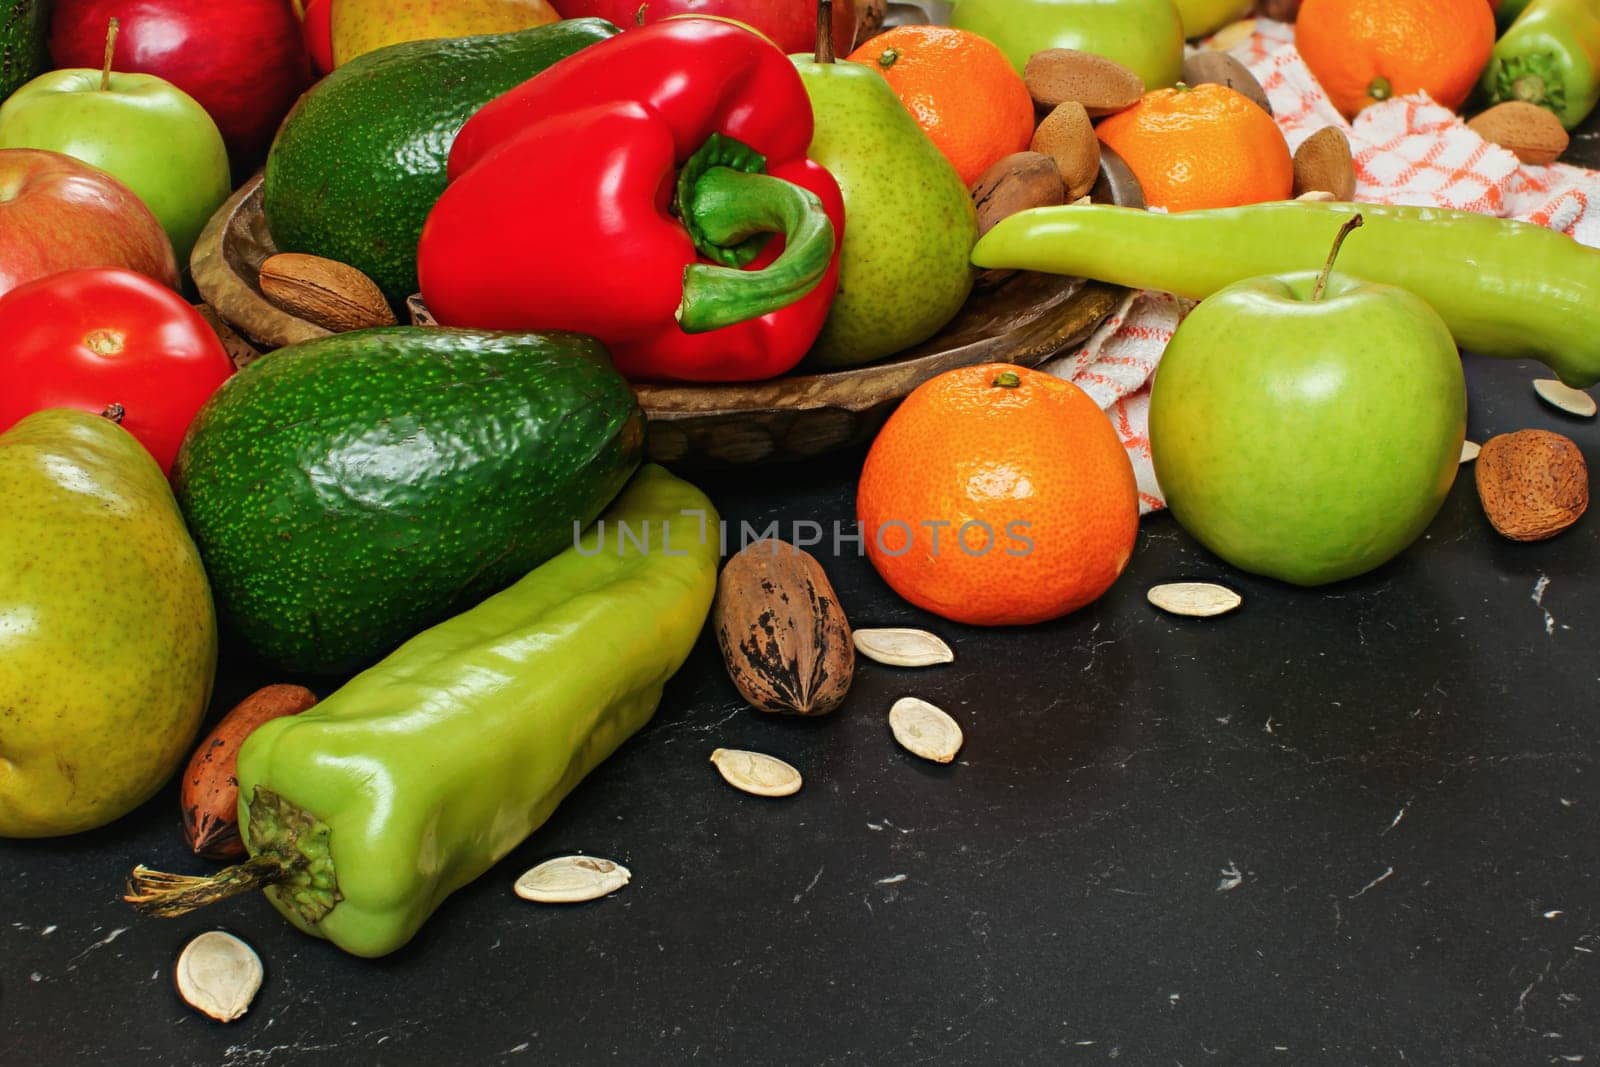 Mixed fruits and vegetables - red peppers, avocado, apples, pears, tangerines, pecan nuts, almonds and pumpkin seeds on wooden bowl, close up view